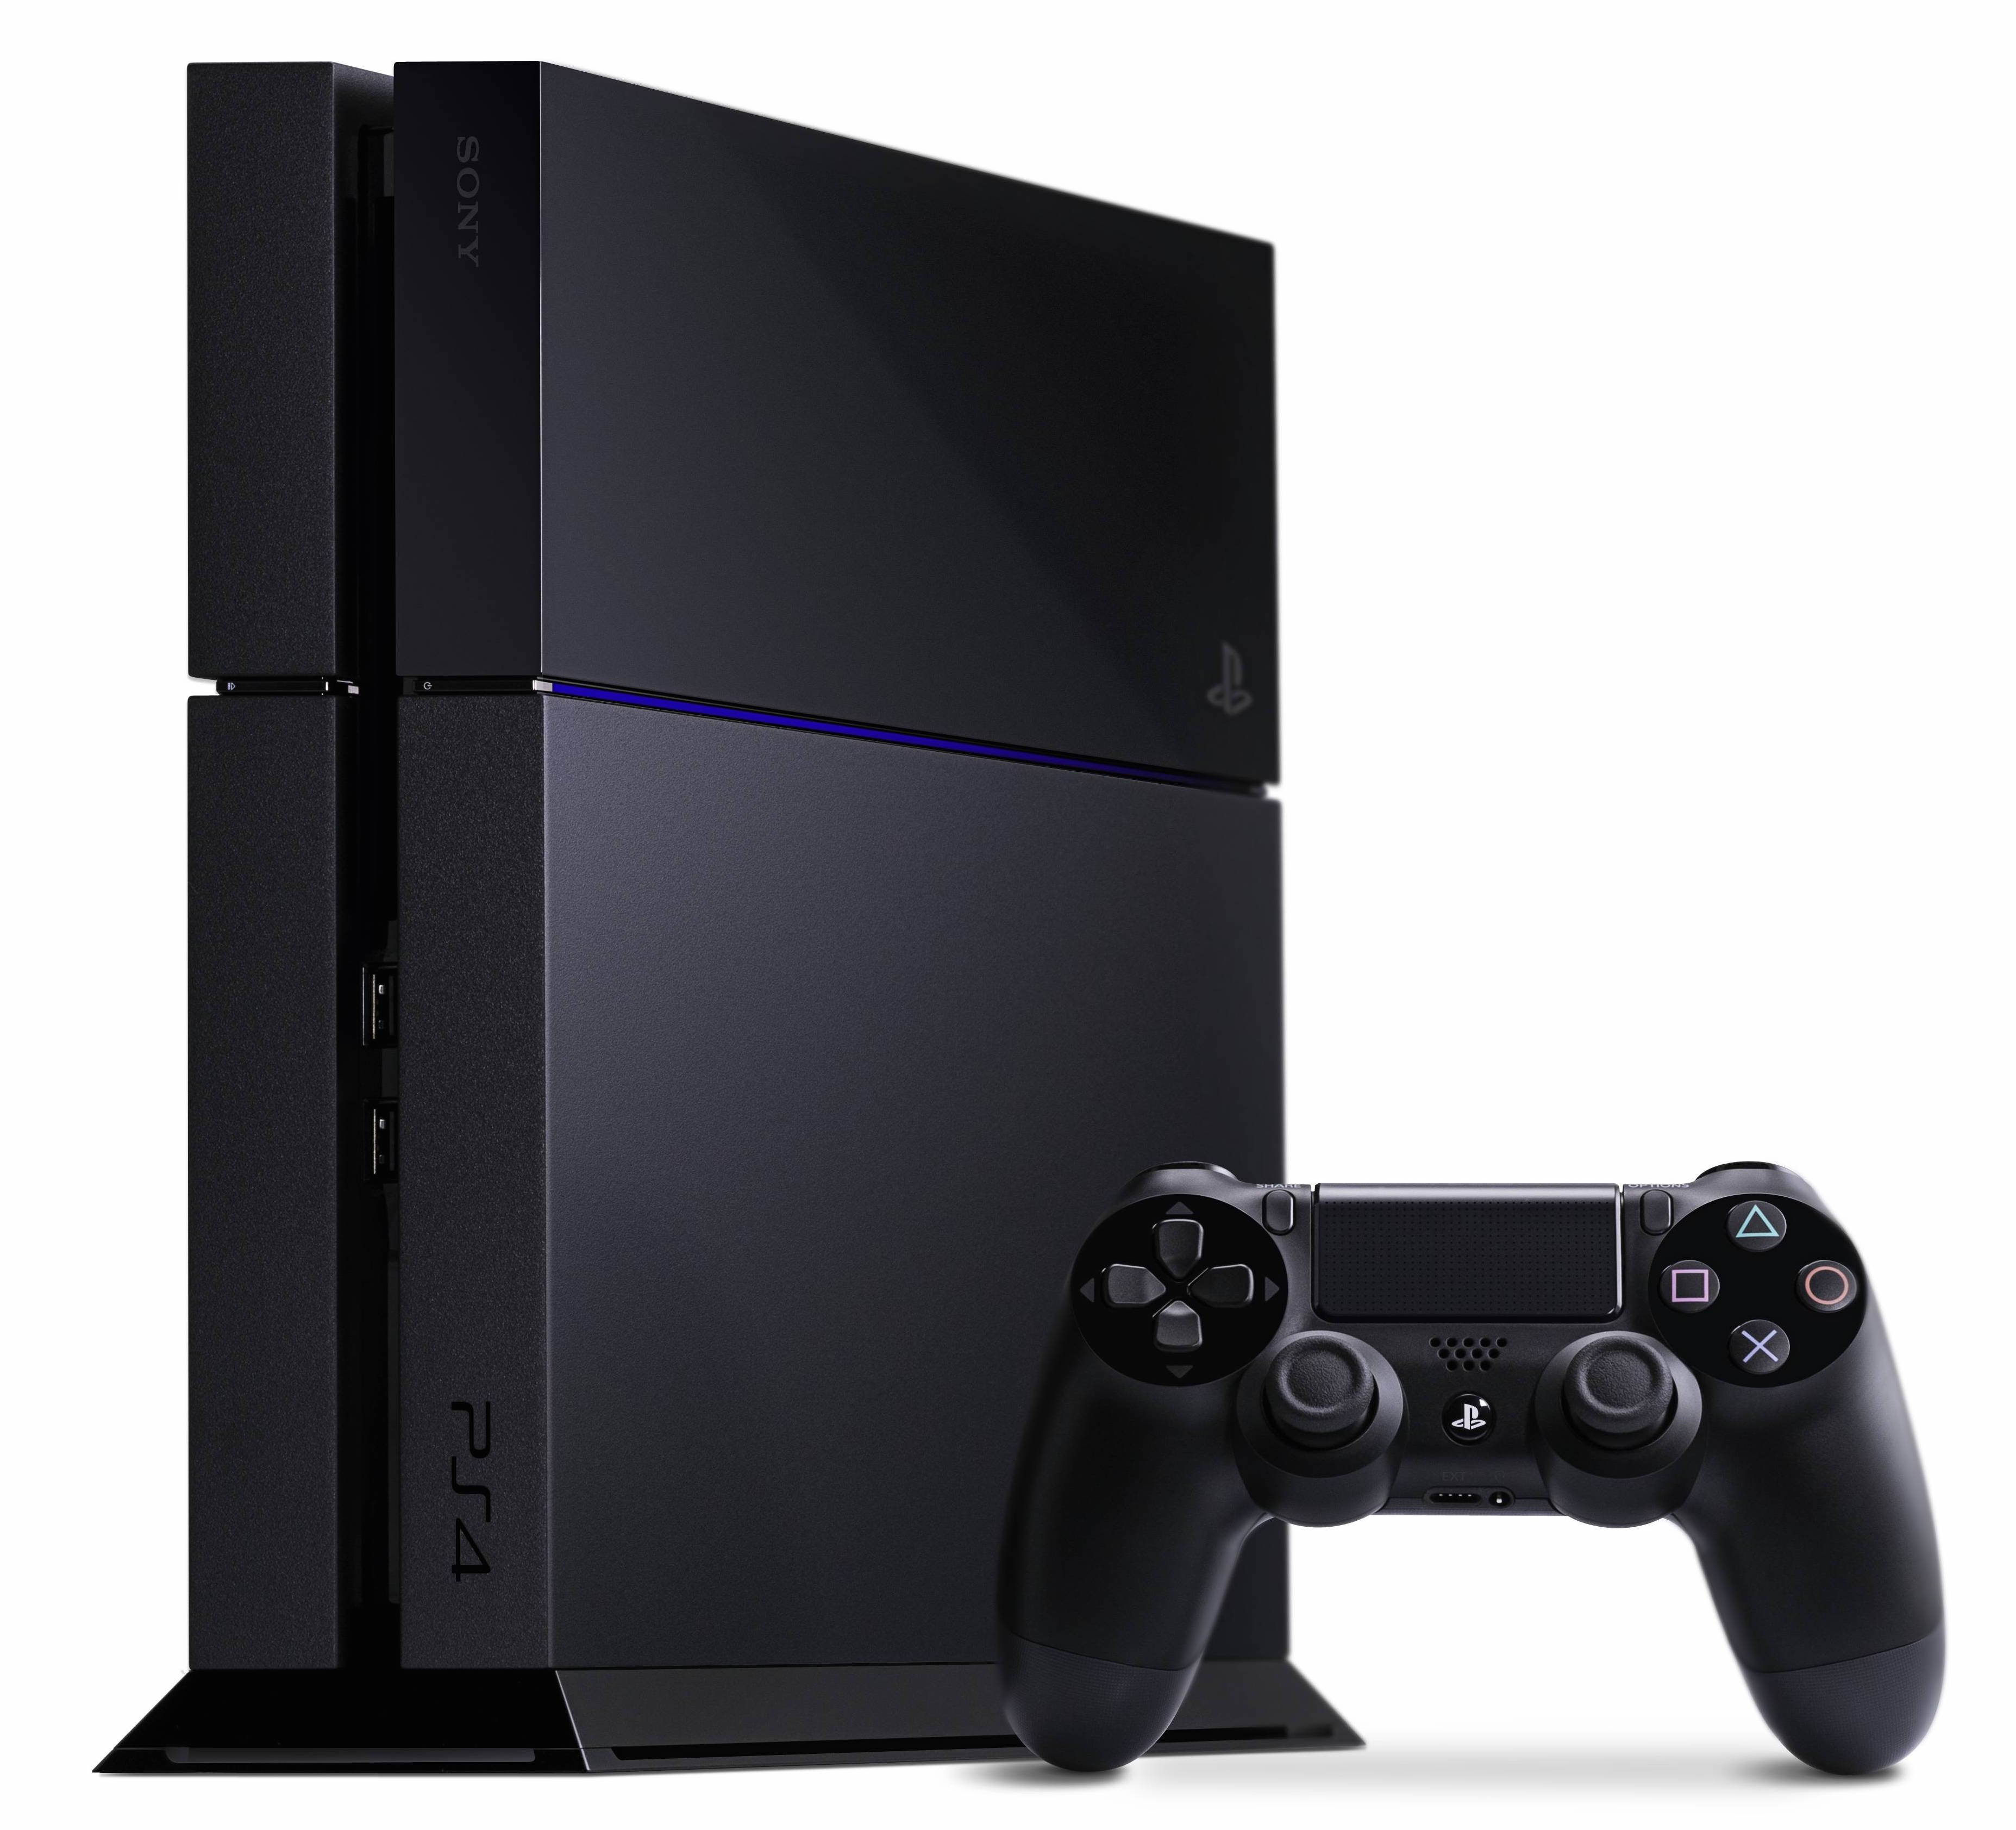 File:Sony-PlayStation-4-PS4-Console-FL.jpg - Wikibooks, open books for an  open world